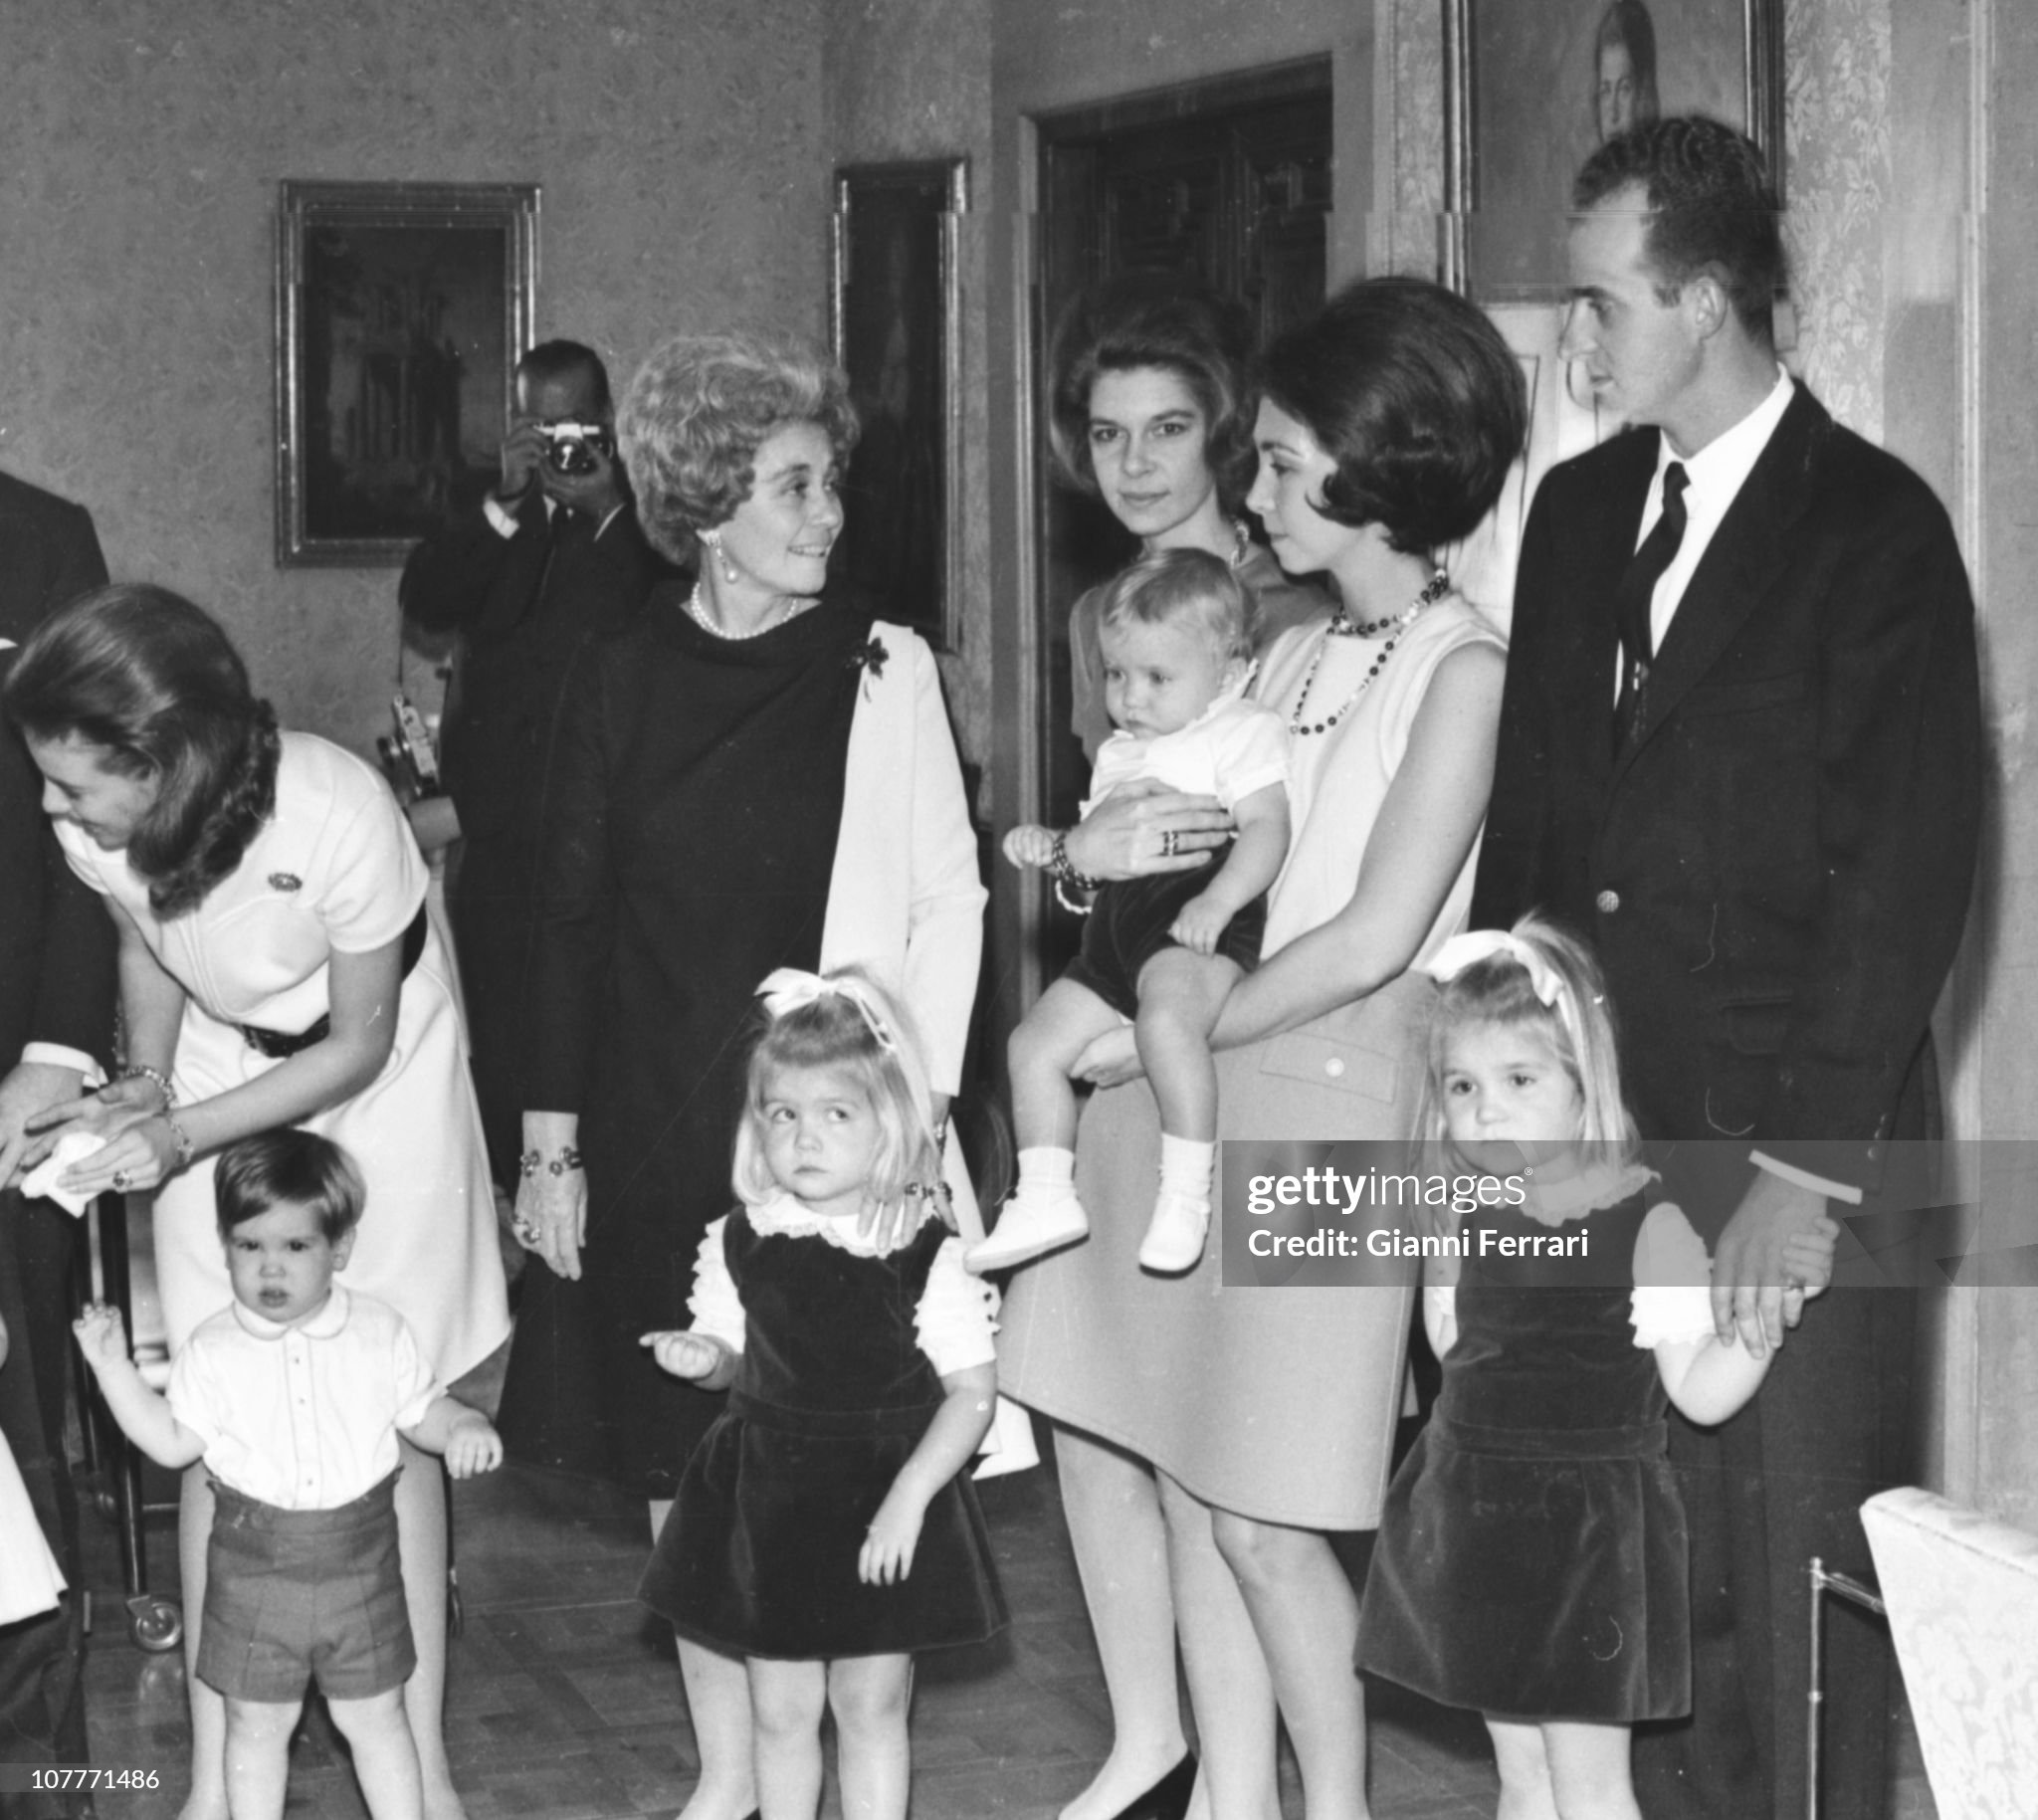 the-spanish-and-greek-royal-families-in-the-zarzuela-palace-anamaria-queen-of-greece-his-son.jpg